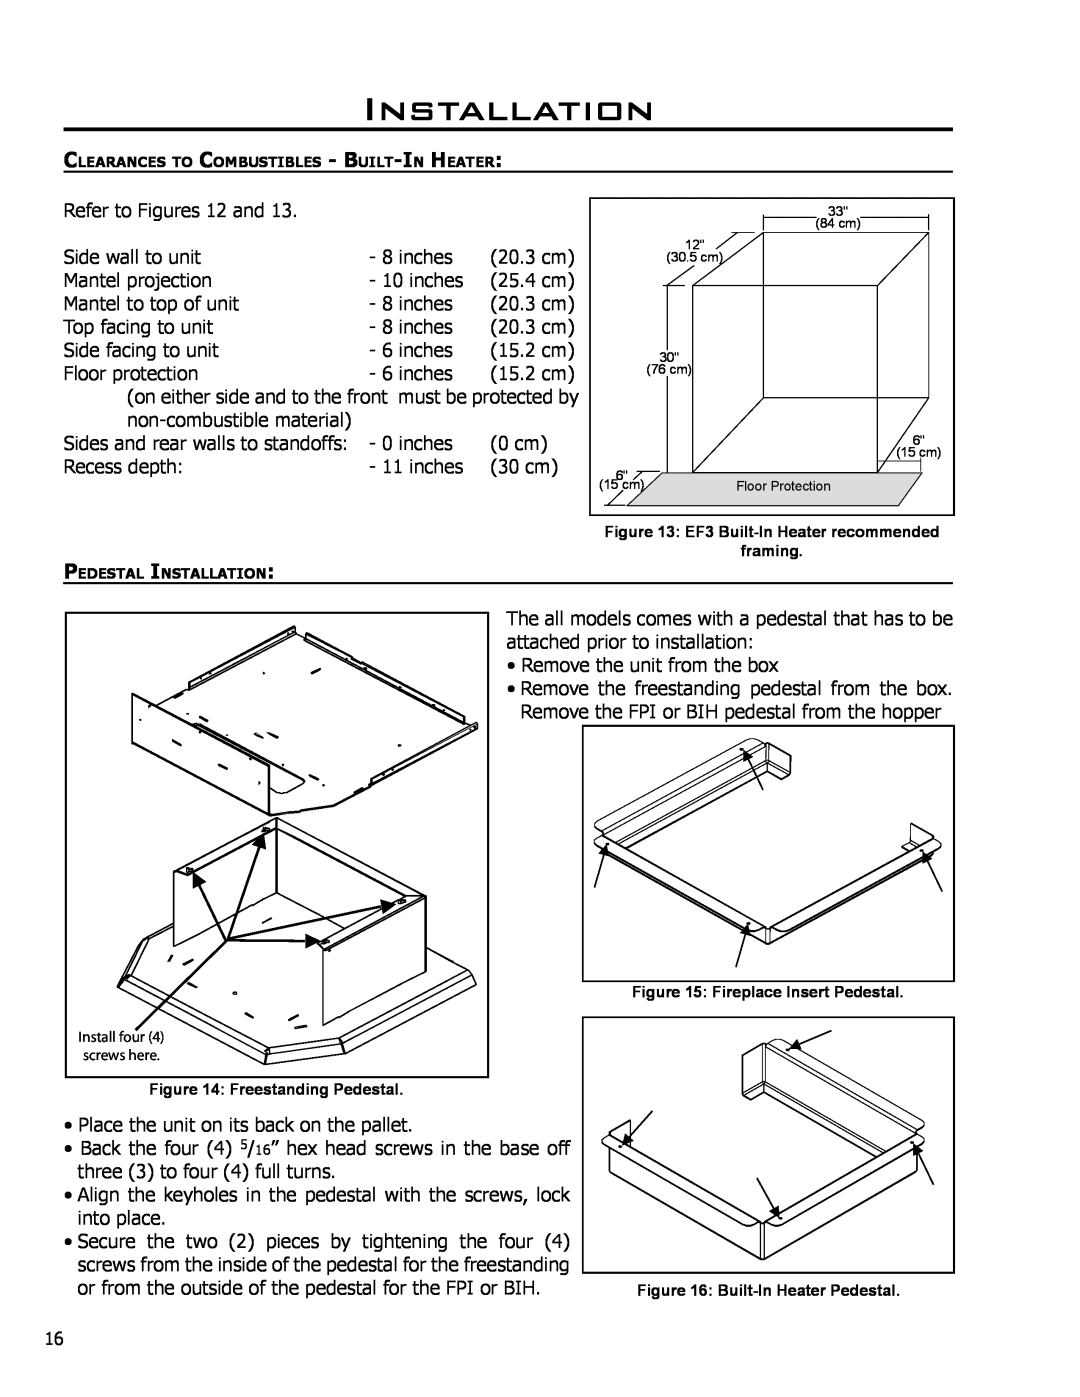 Enviro EF3 owner manual Installation, Refer to Figures 12 and 